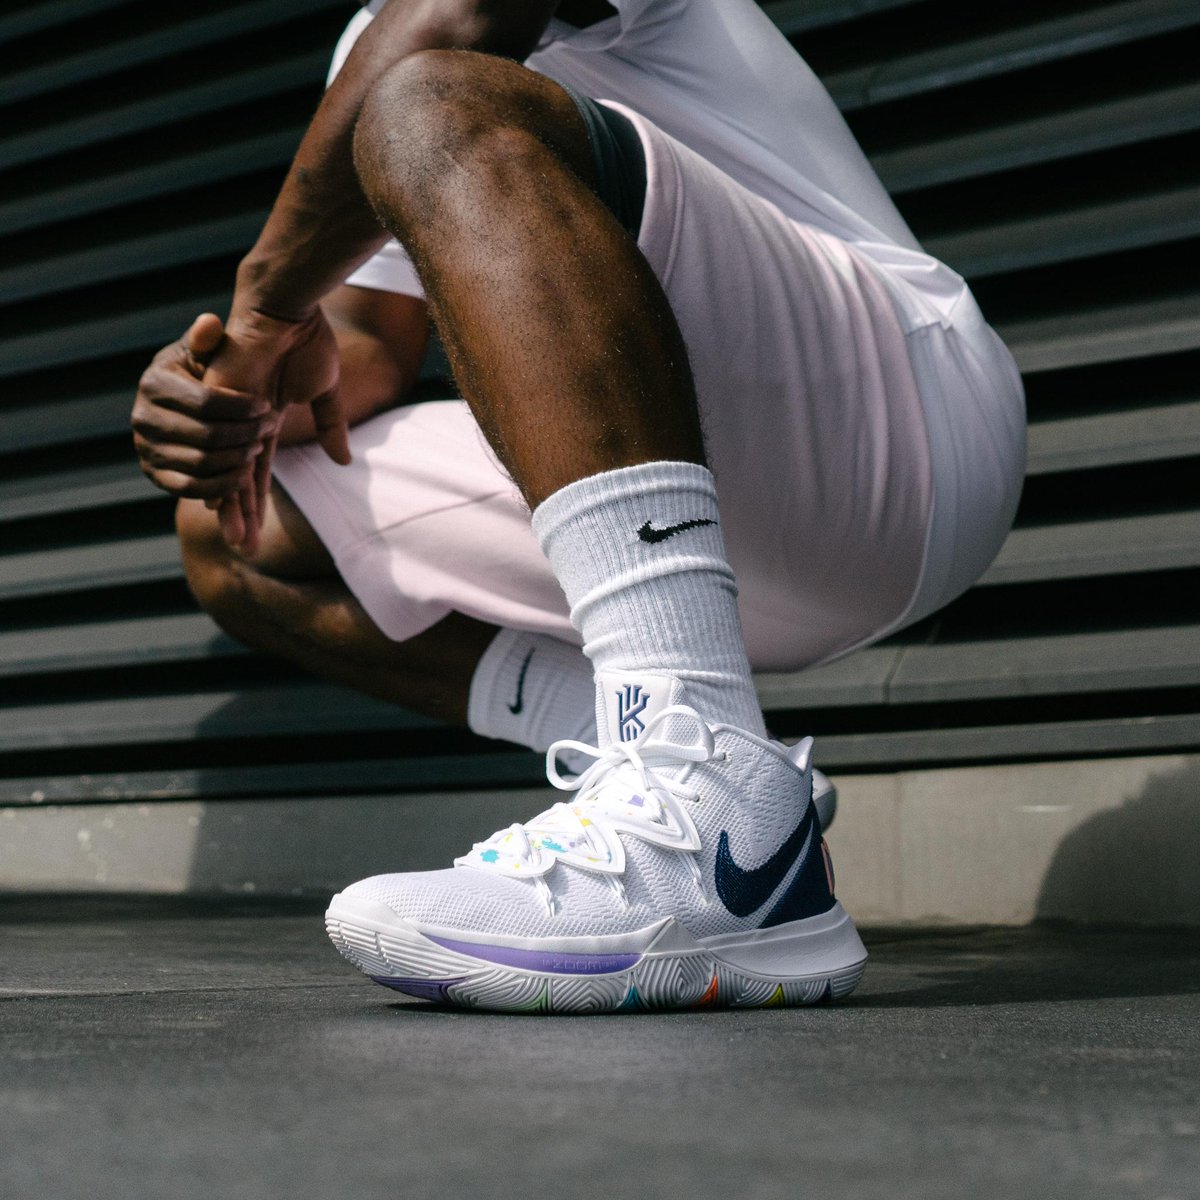 Nike Day inspired Men's \u0026 GS Kyrie 